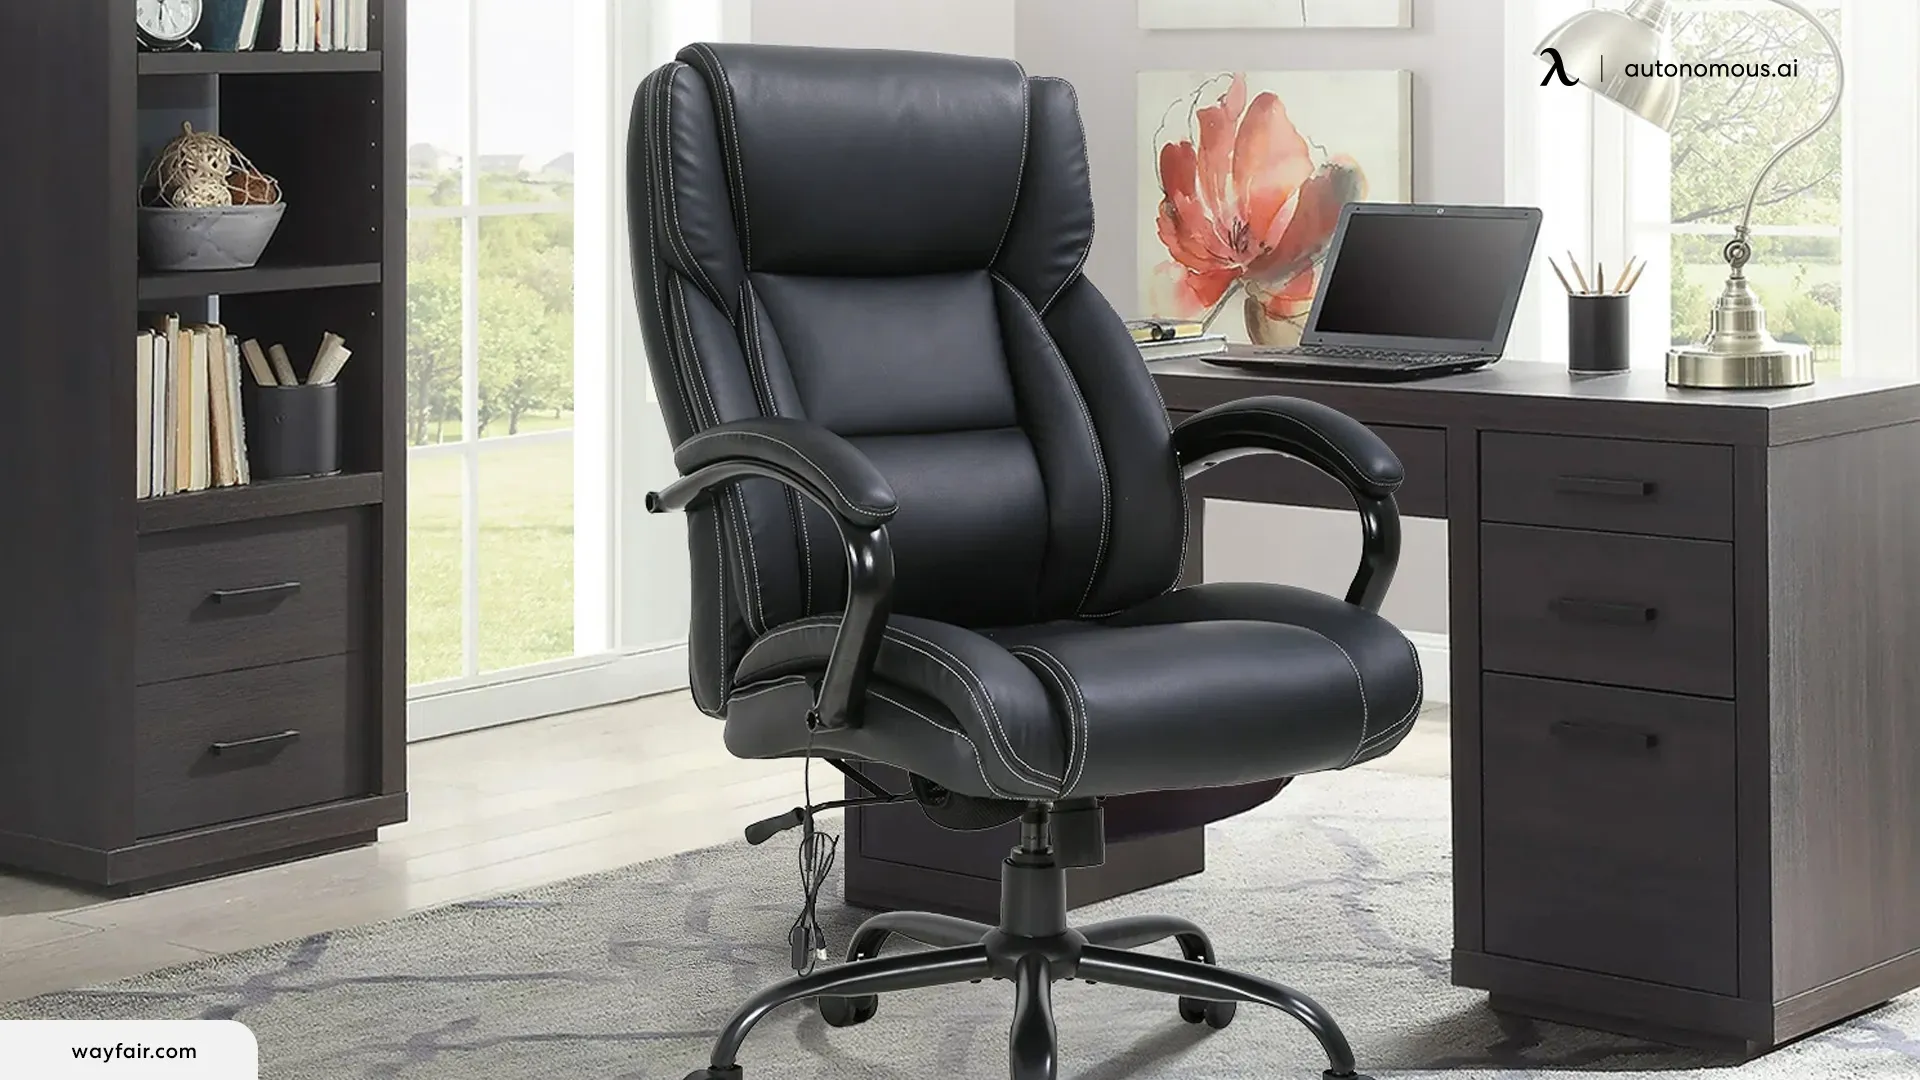 The 5 Best Heavy Duty Office Chairs With 600 Lbs Weight Capacity